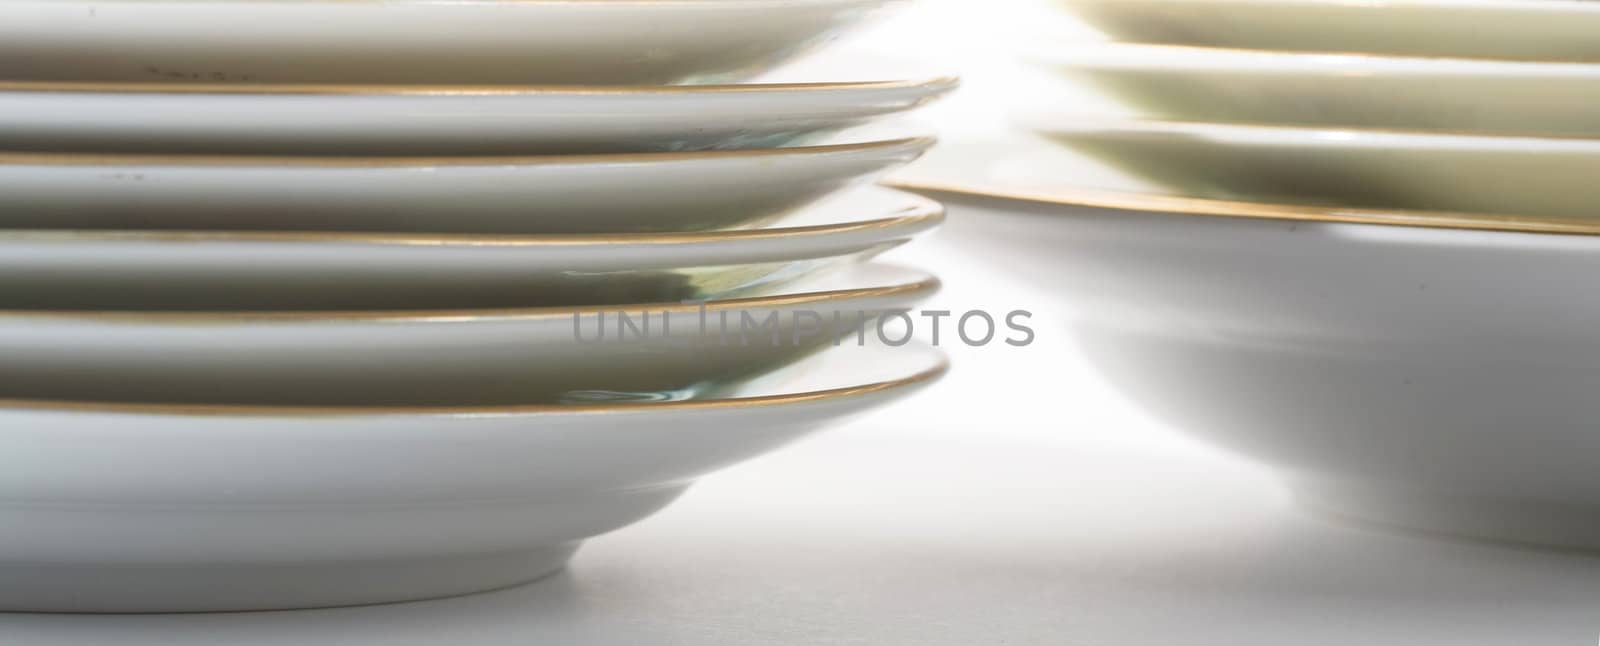 Stock photo: food theme: an image of plates on a table